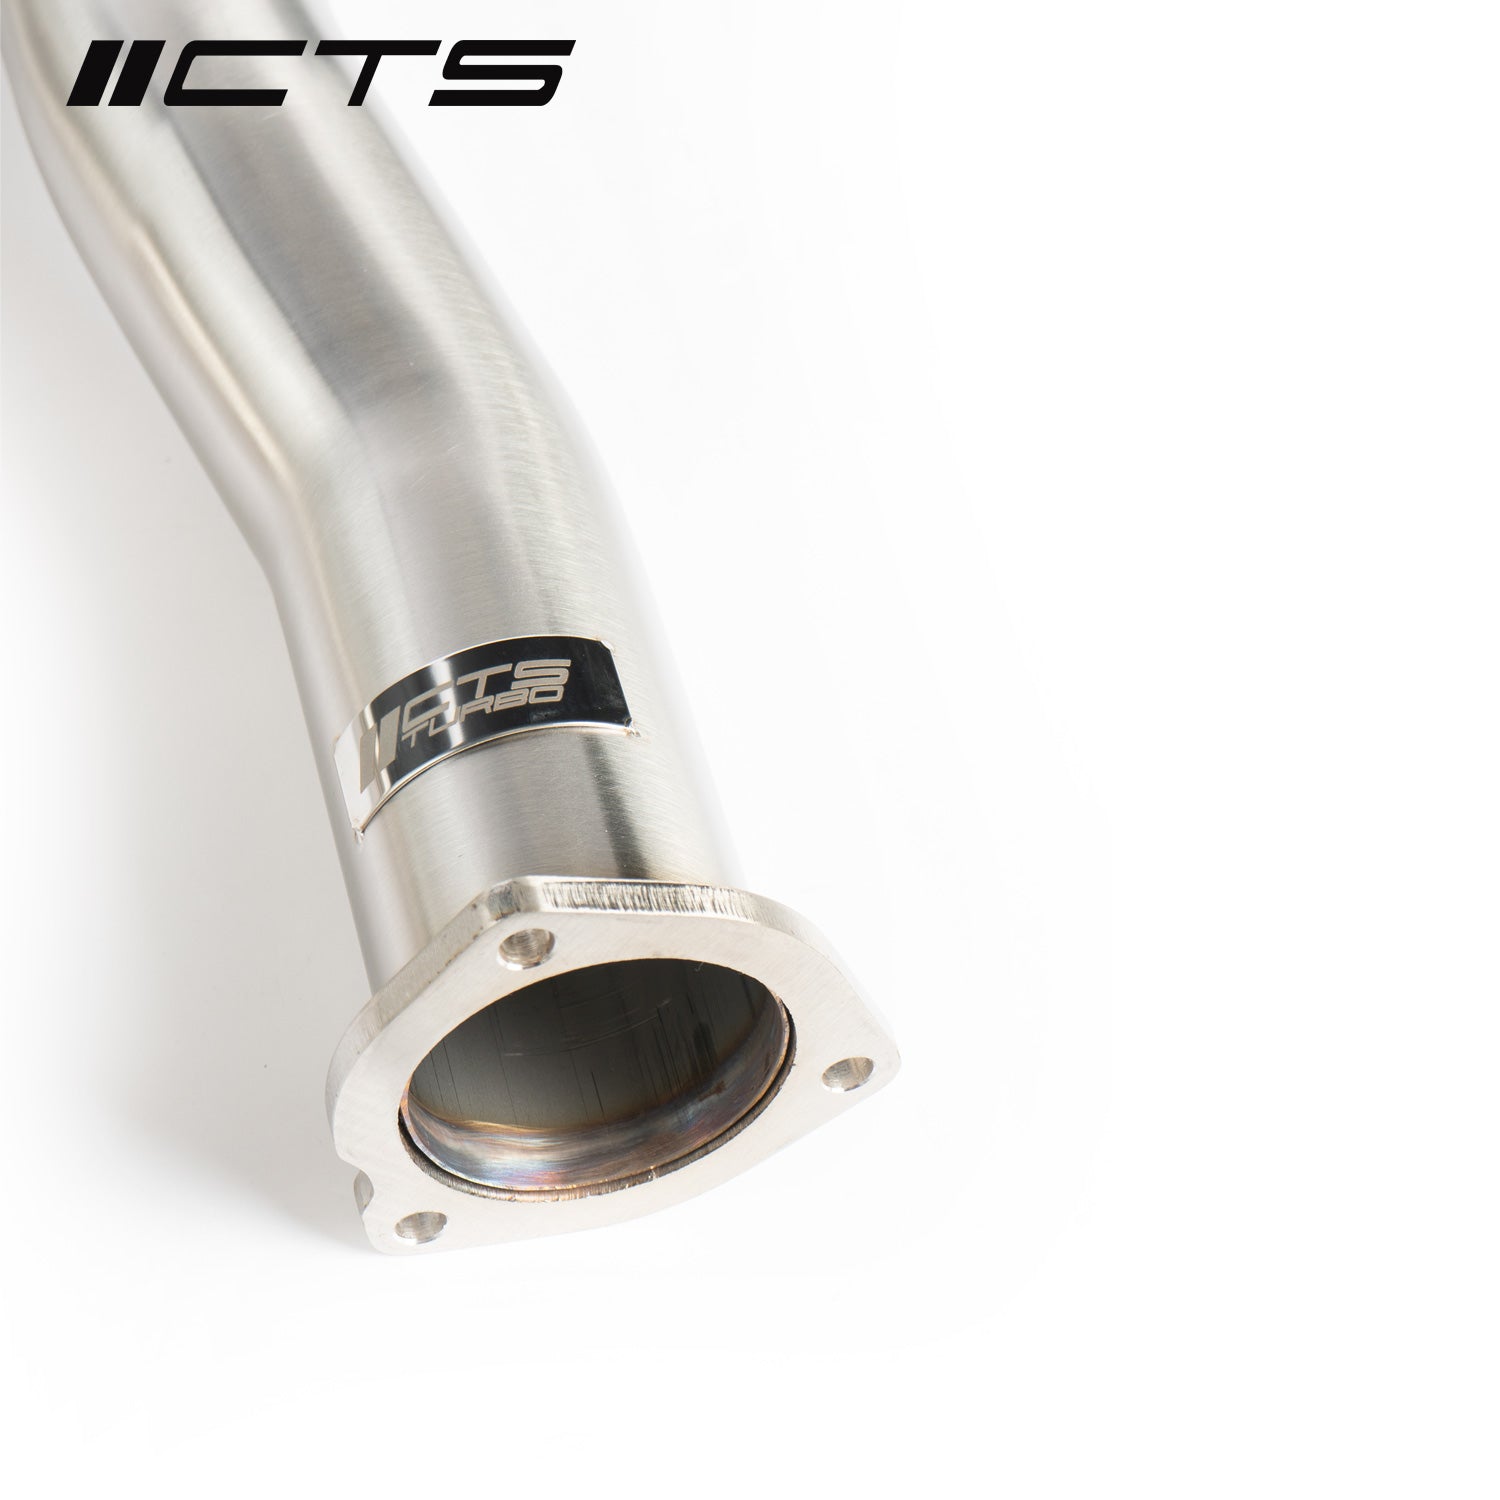 CTS TURBO PERFORMANCE MID-PIPES FOR 8V/8Y AUDI RS3 AND 8S AUDI TTRS - 0